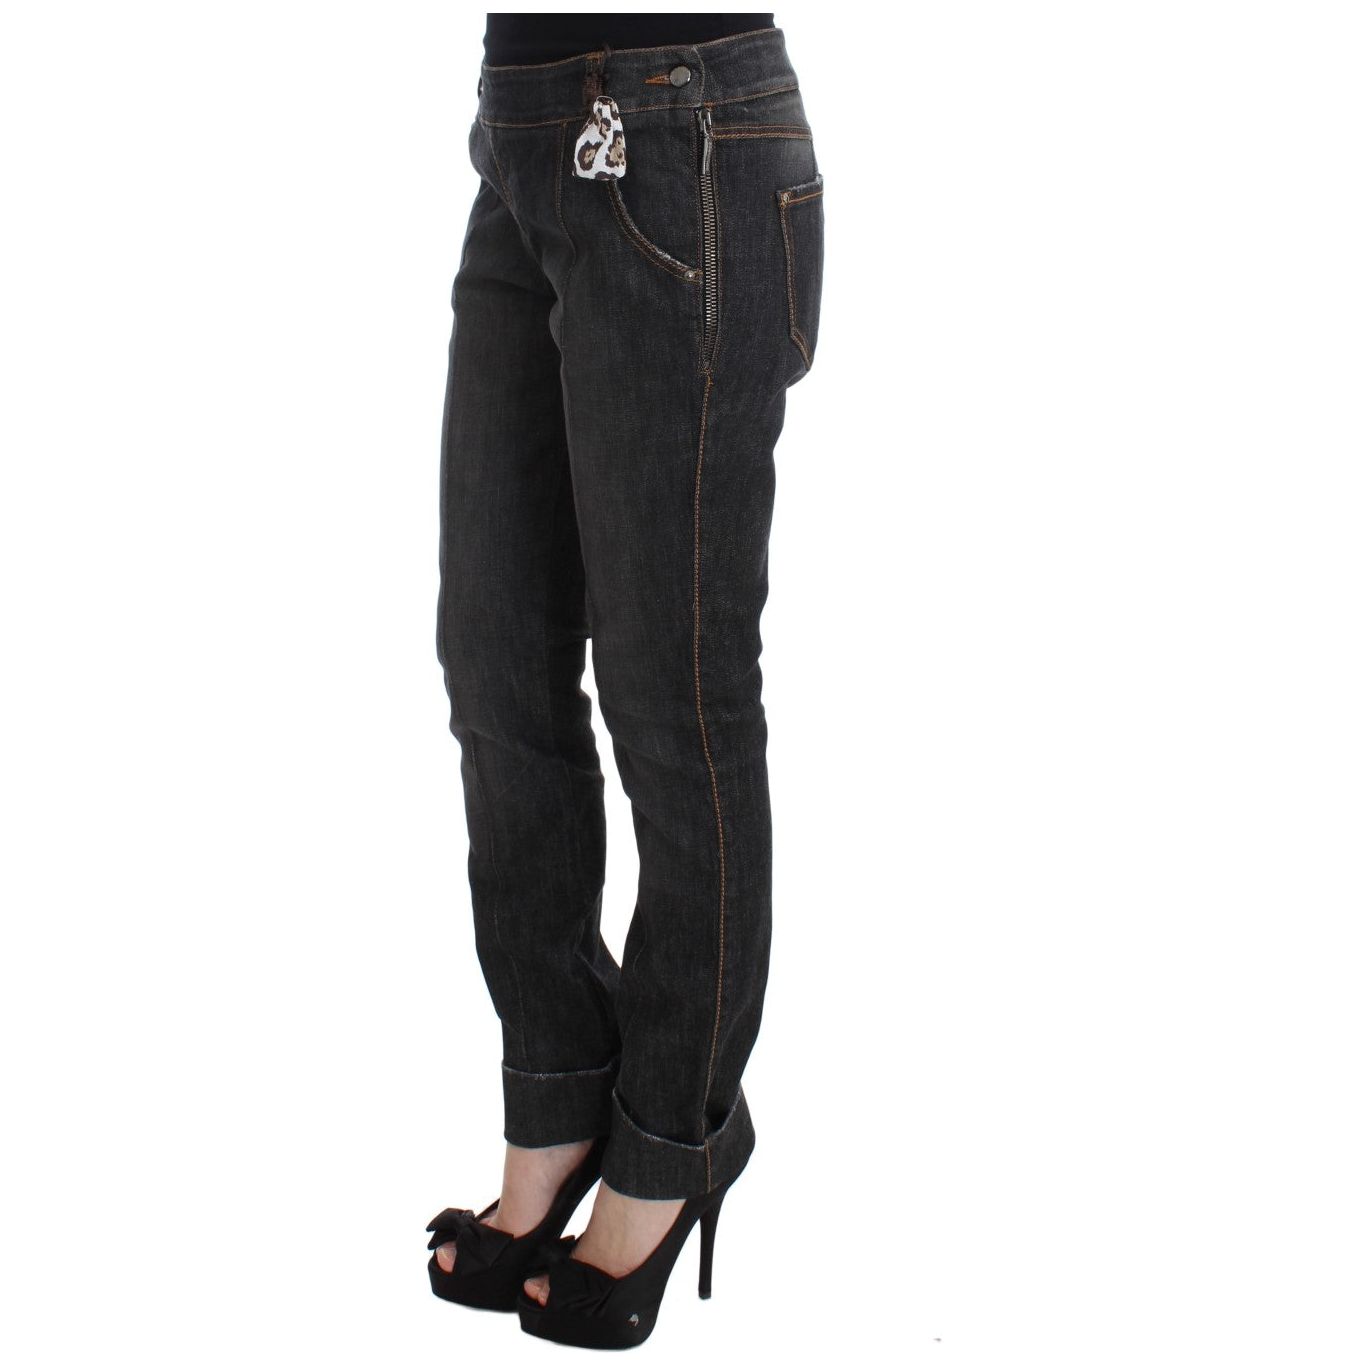 Chic Slim Fit Gray Wash Jeans